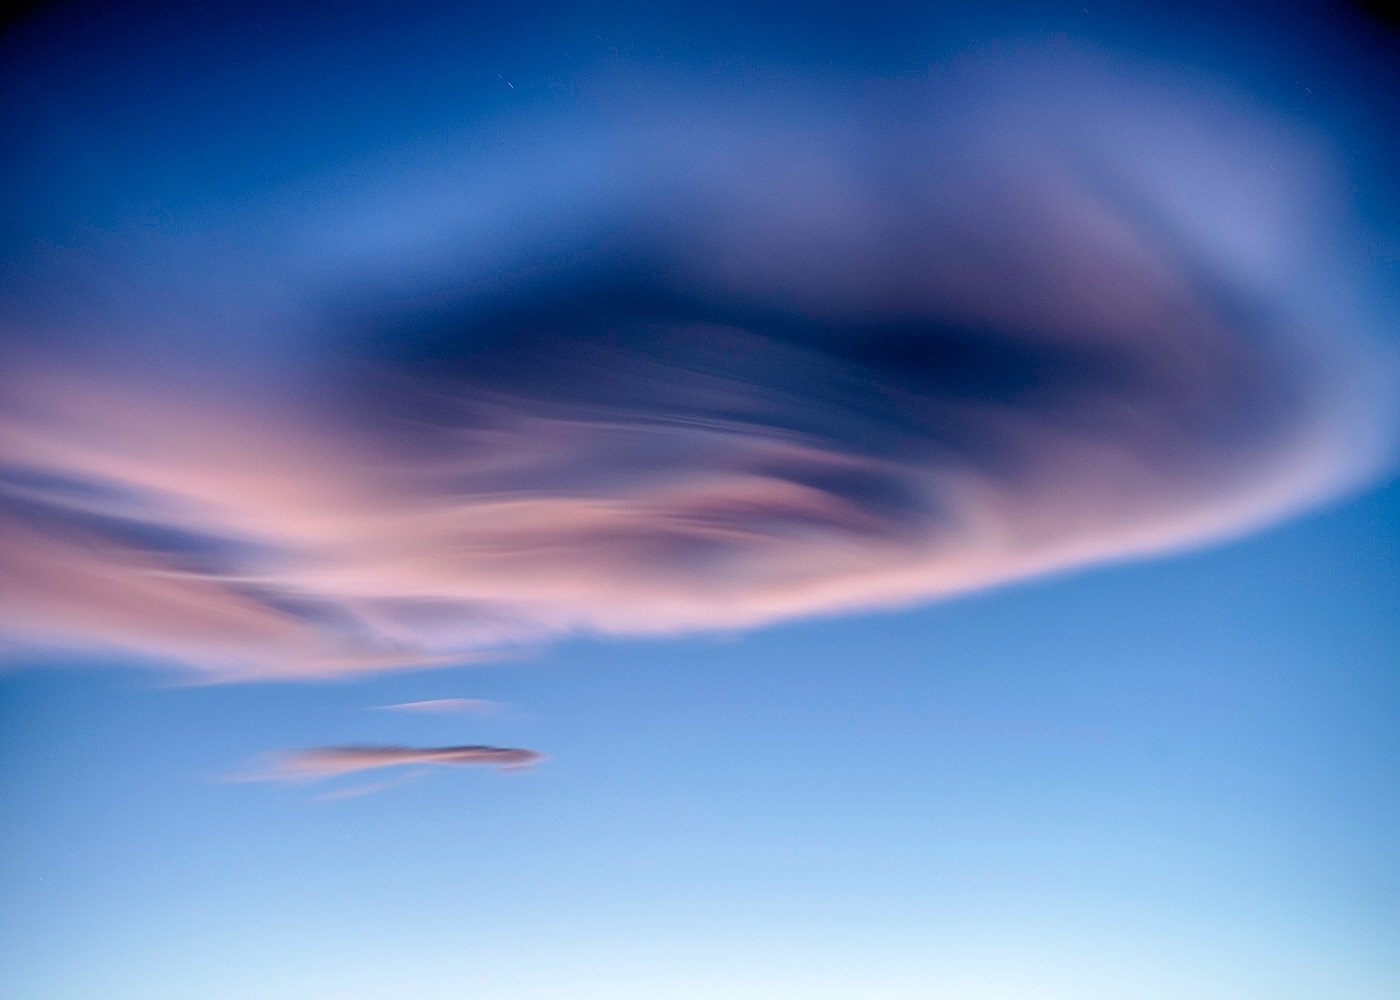 When spring came, even the false spring, there were no problems except where to be happiest.&rdquo;
~ Ernest Hemingway

Lenticular Clouds!

Give your Mom the gift of art this year!

Shop the Mother&rsquo;s Day Sale and get 15% everything! Use the pro